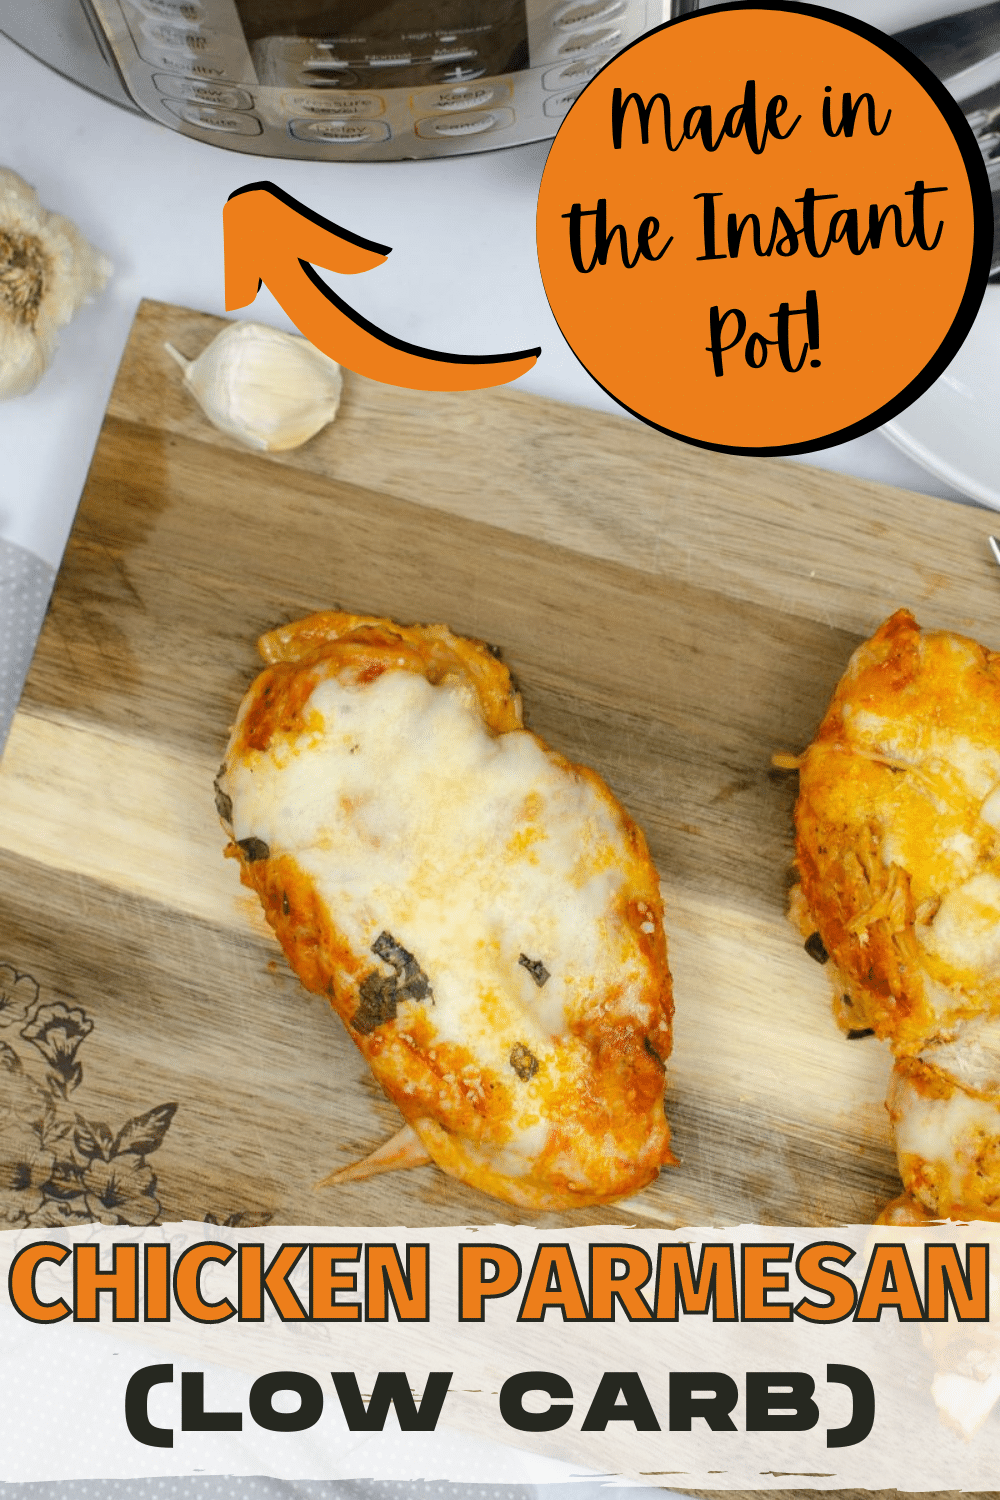 This instant pot low carb Instant Pot Chicken Parmesan with marinara sauce is perfect for indulging while yet eating healthy! #instantpot #chickenparmesan #lowcarb #italianrecipe #chickenrecipe via @wondermomwannab